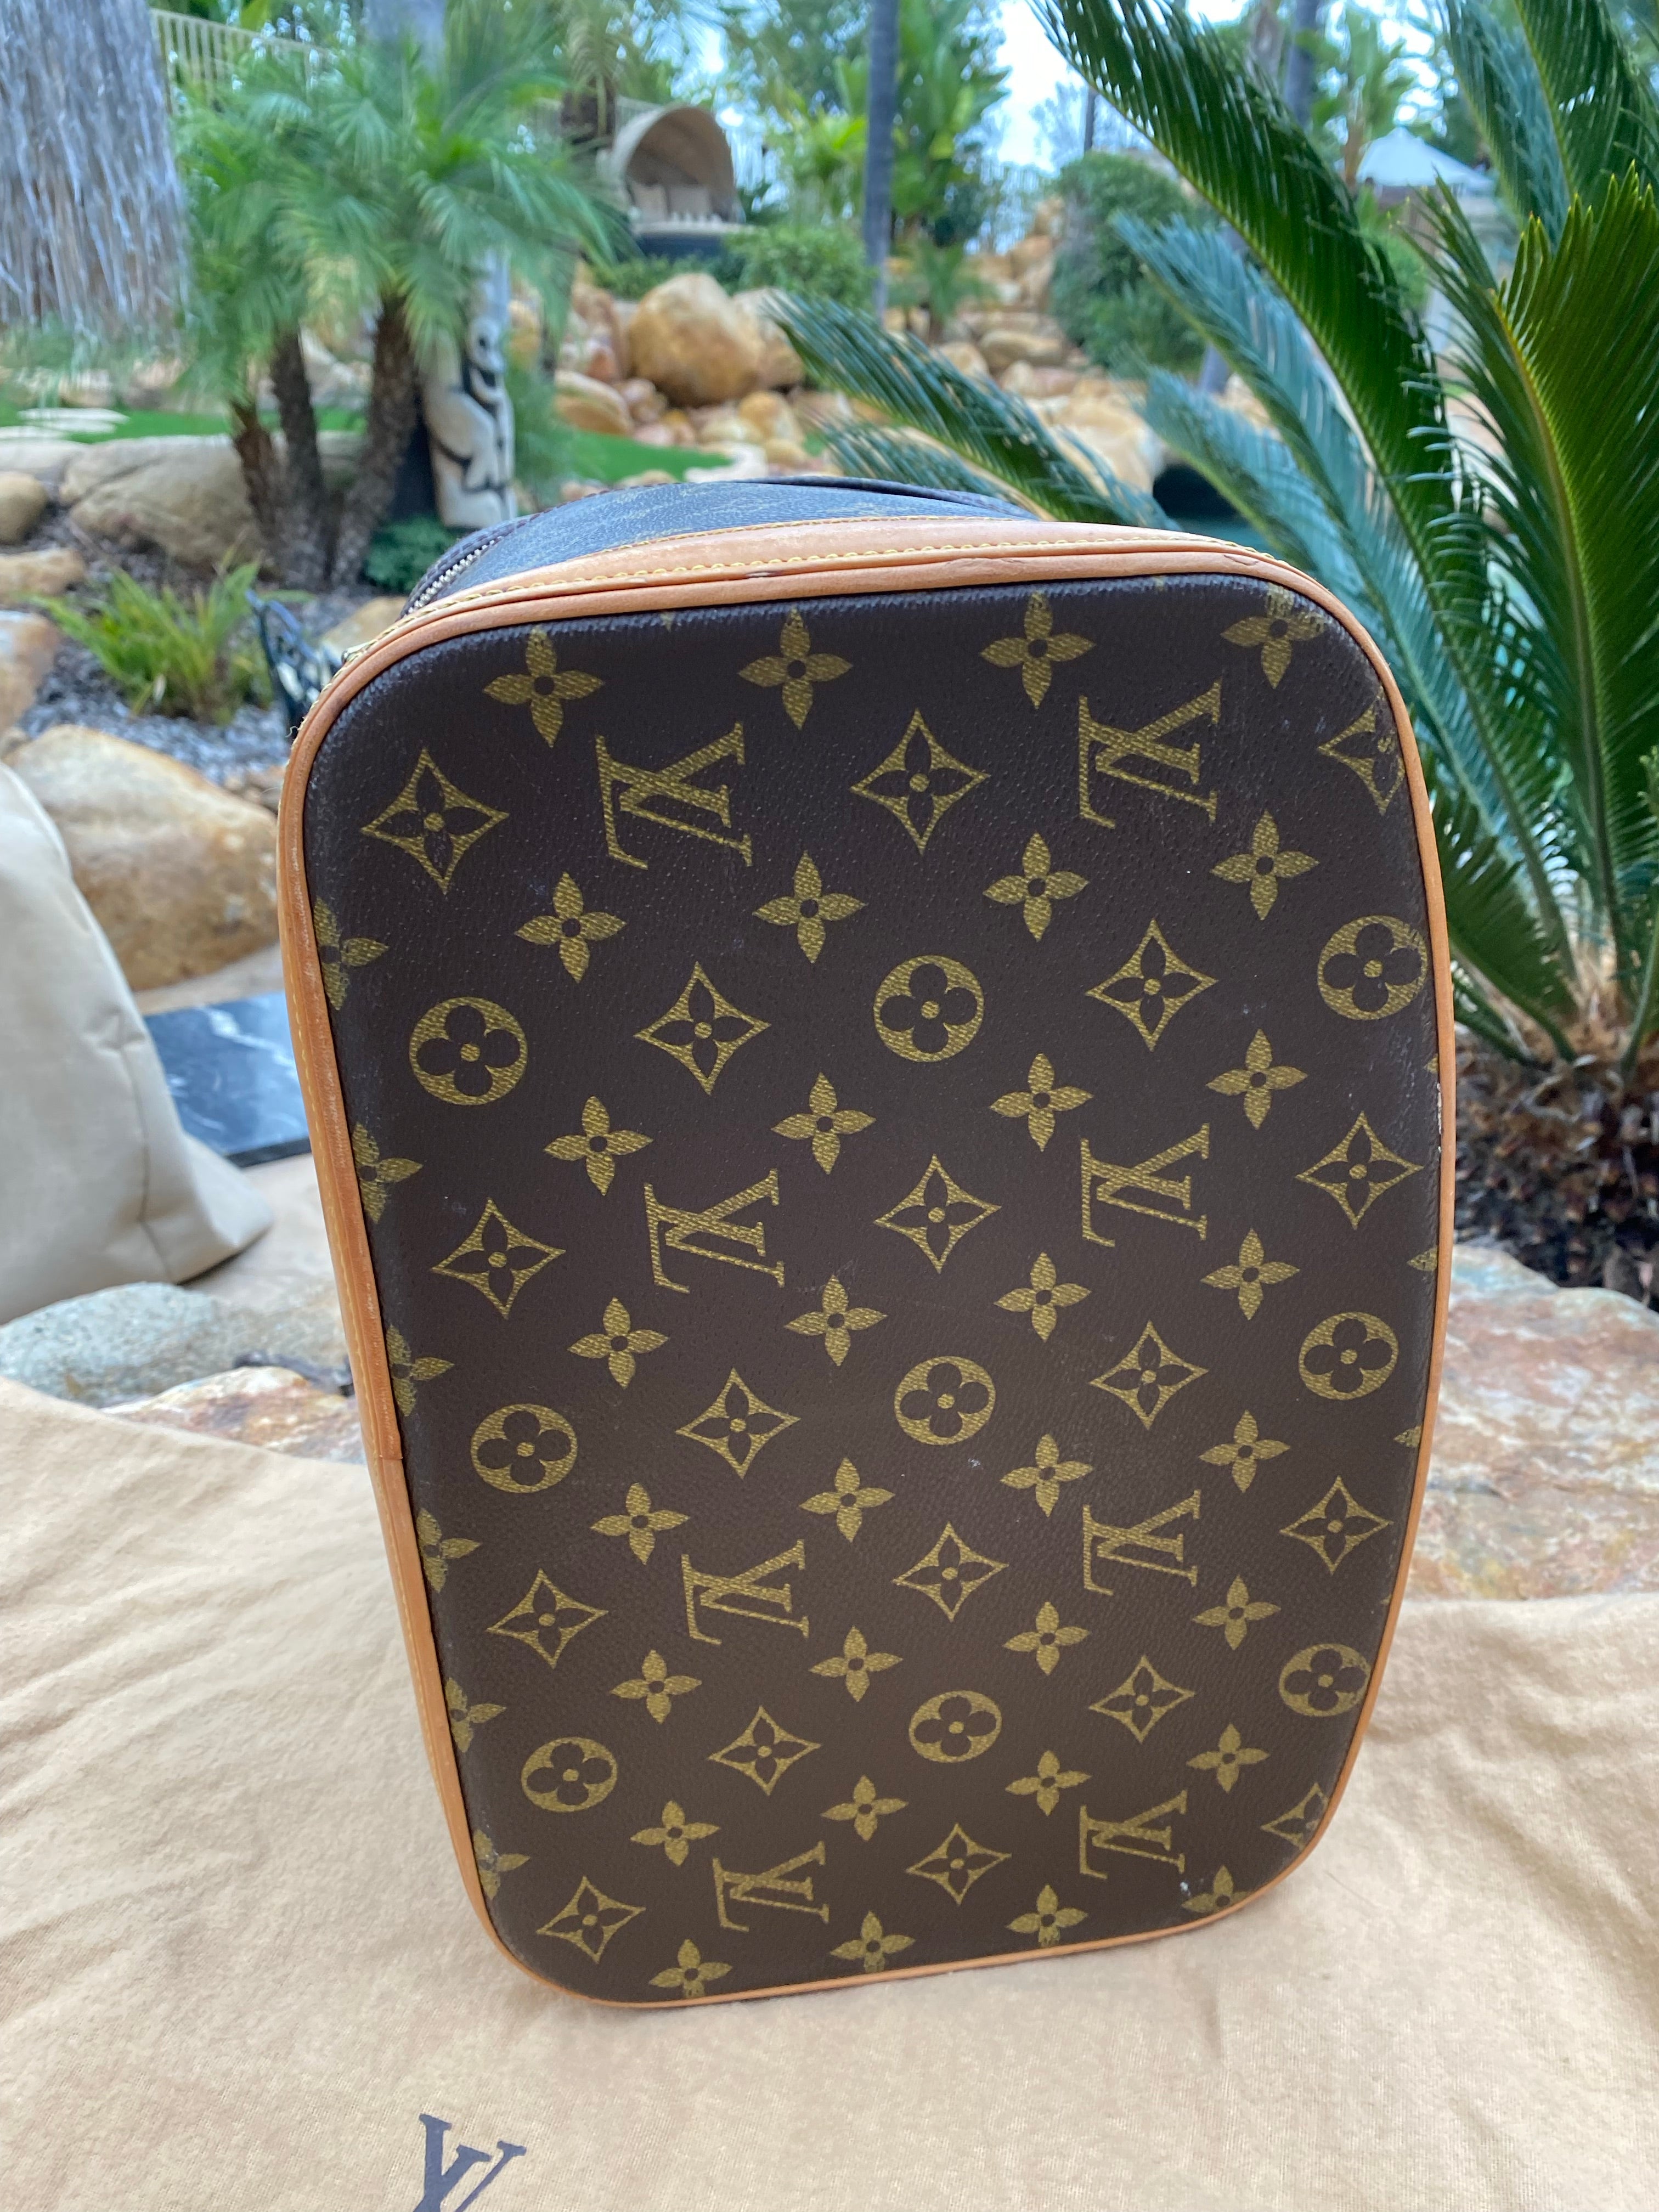 I love this Louis Vuitton train/beauty case! (from Lisa